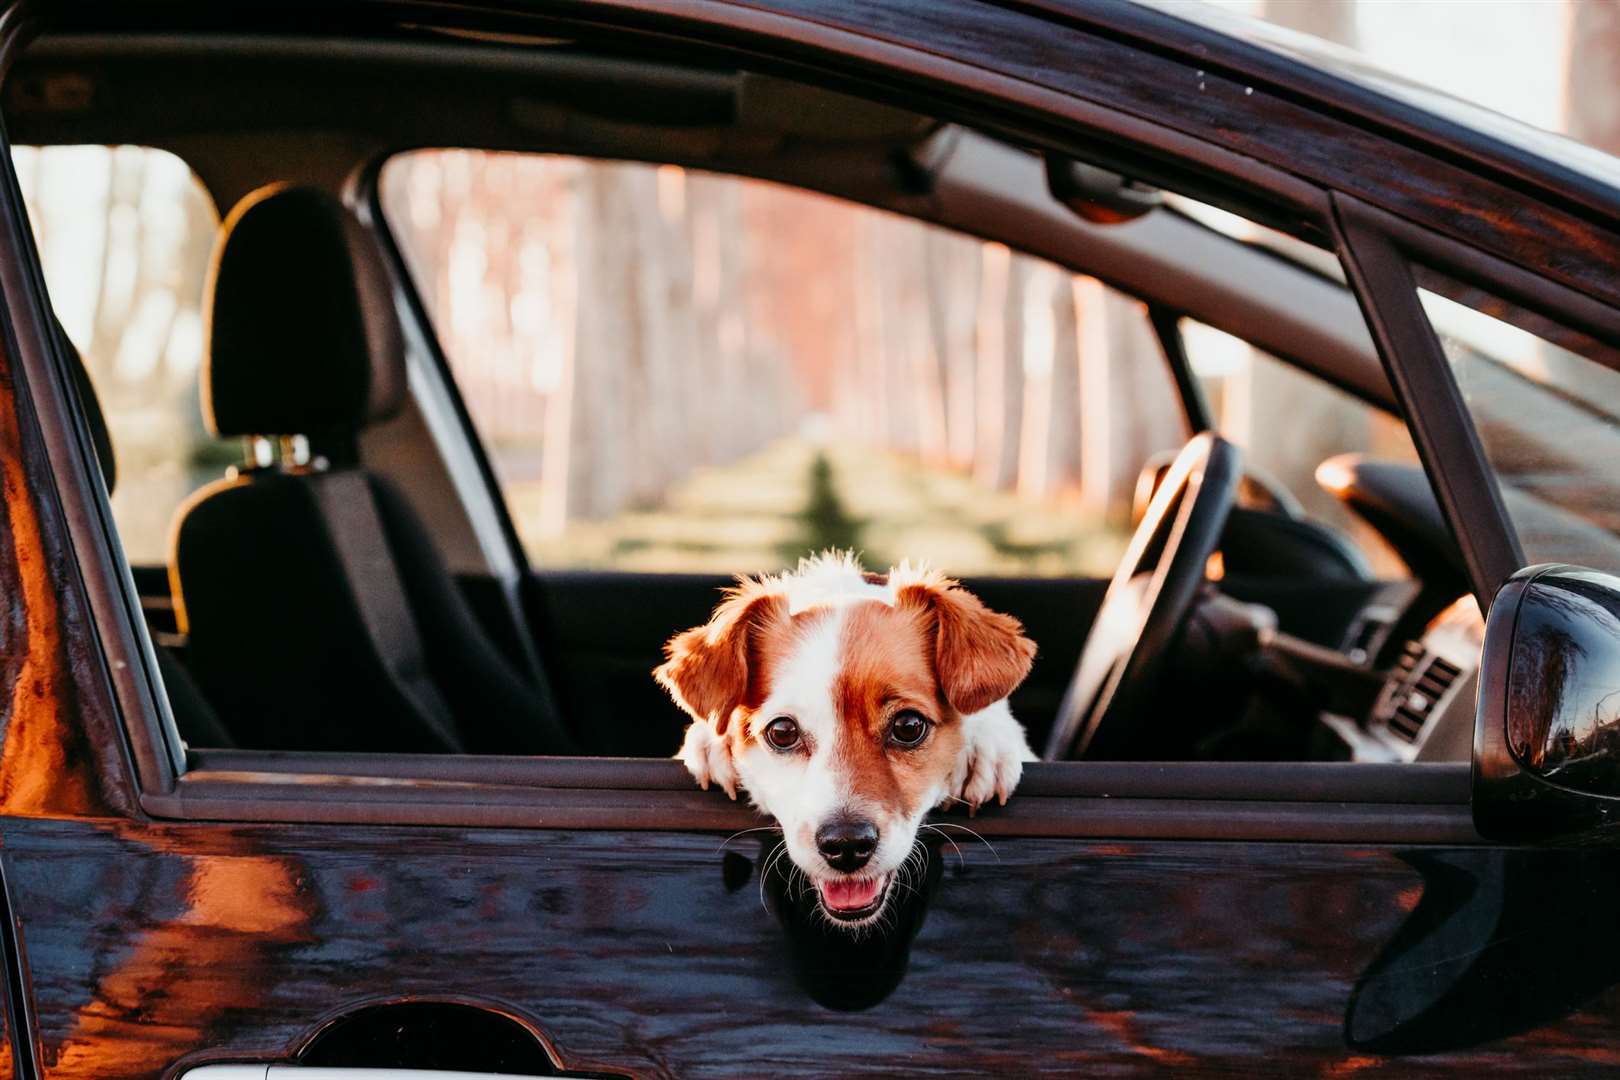 Motorists distracted by their pet being loose in the car risk breaching the Highway Code, invalidating insurance or being in trouble with the police